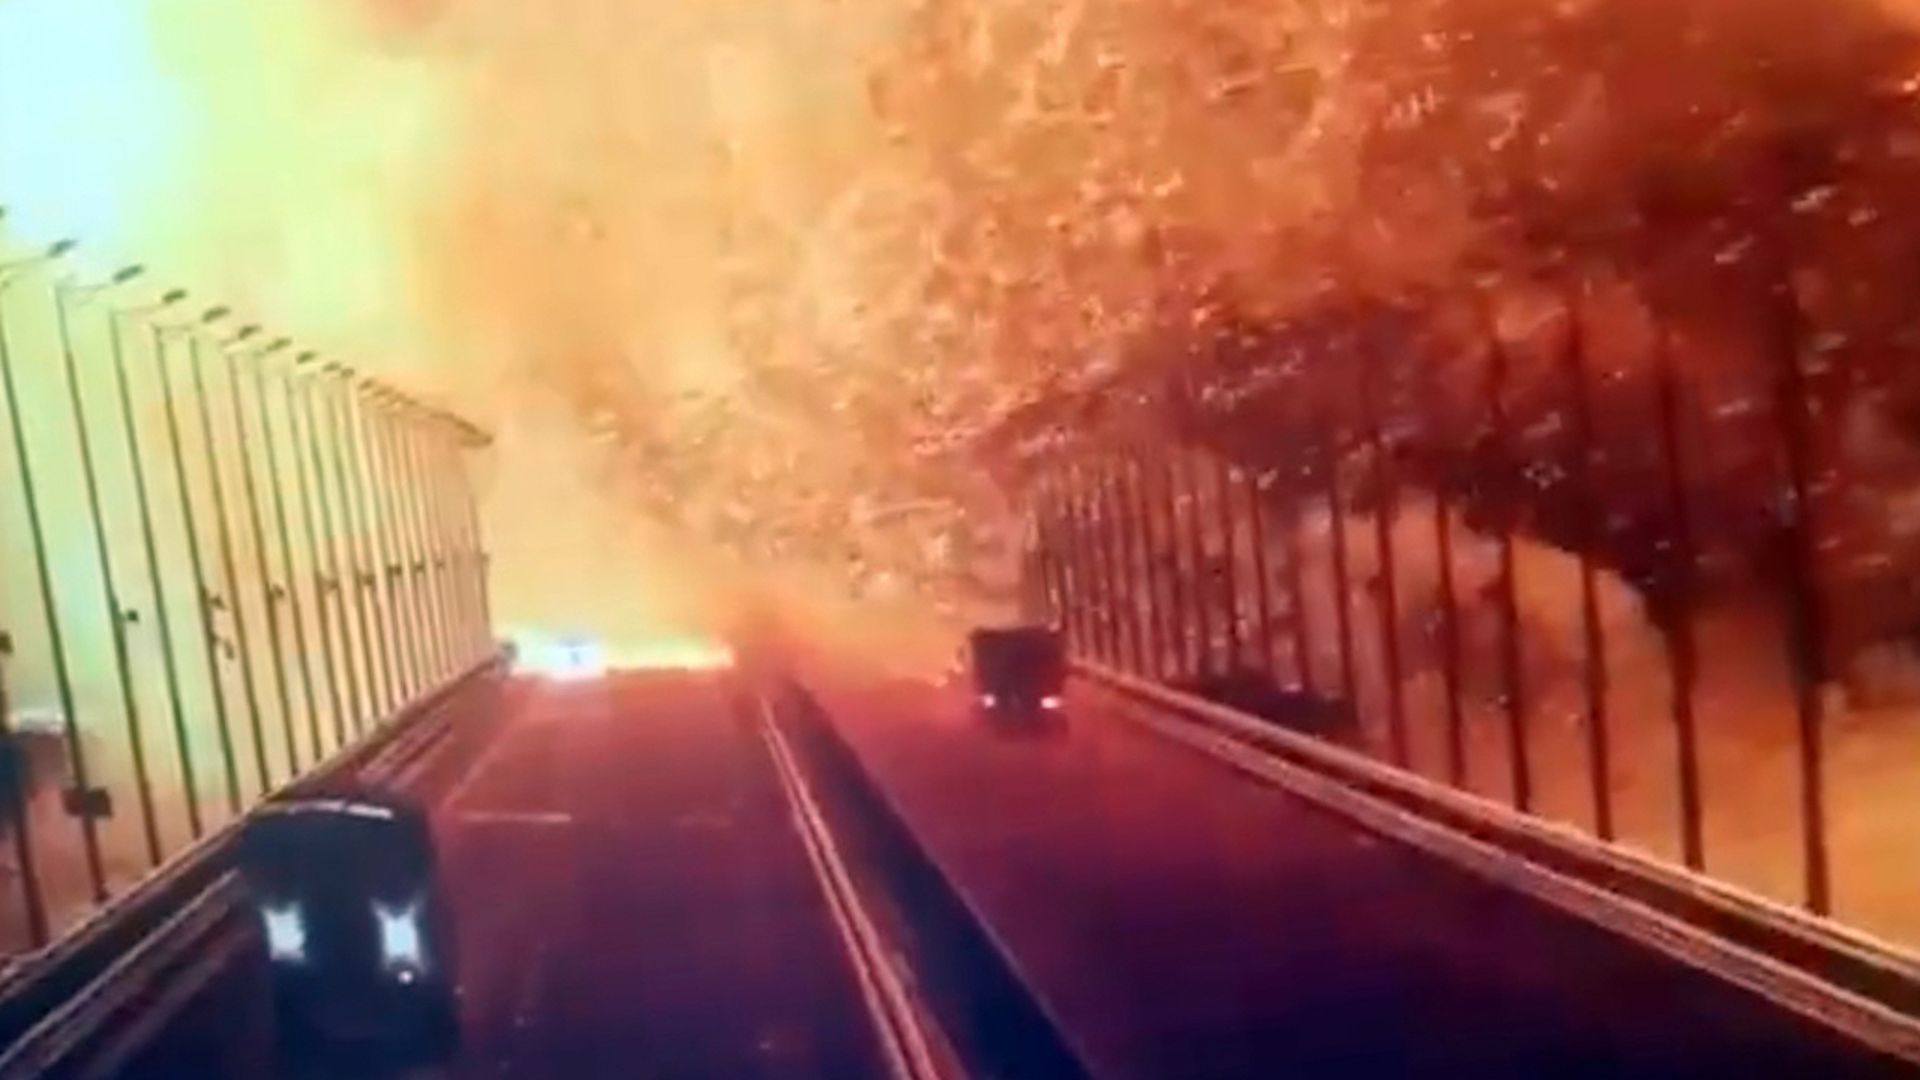  A screen grab from a surveillance footage shows flames and smoke rising up after an explosion at the Kerch bridge.